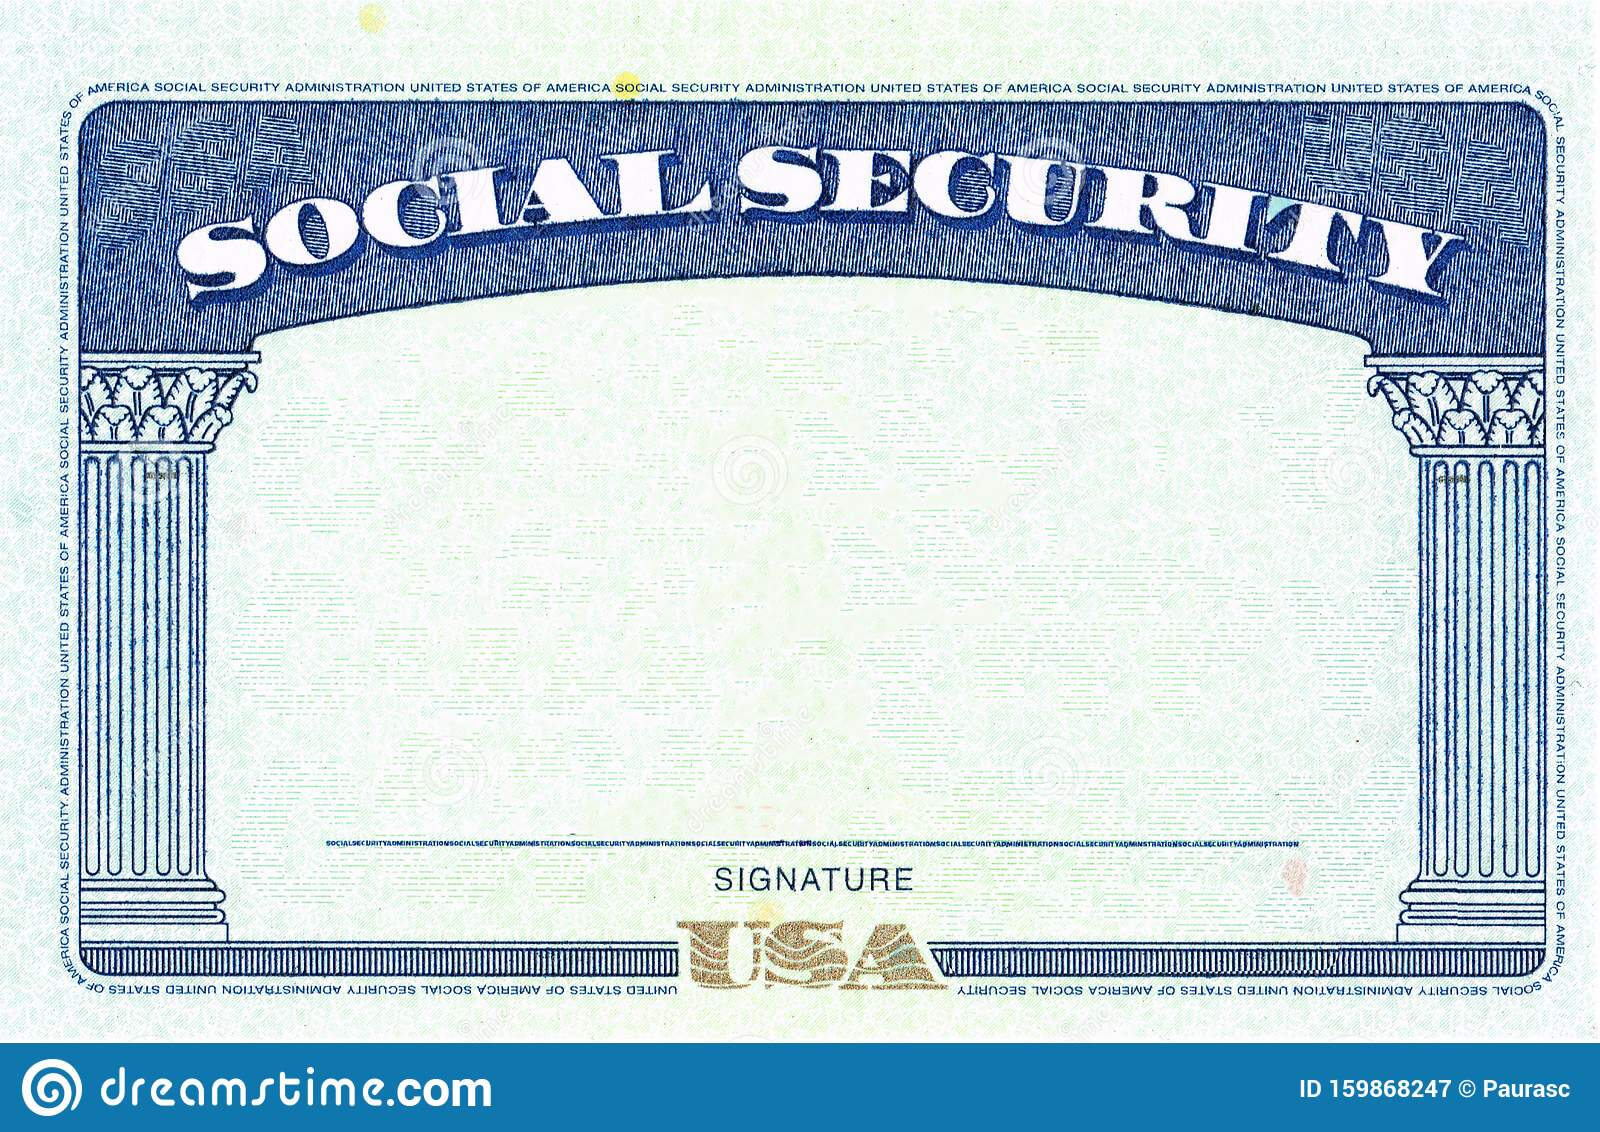 Social Security Card Blank Stock Image. Image Of Emigration Intended For Blank Social Security Card Template Download